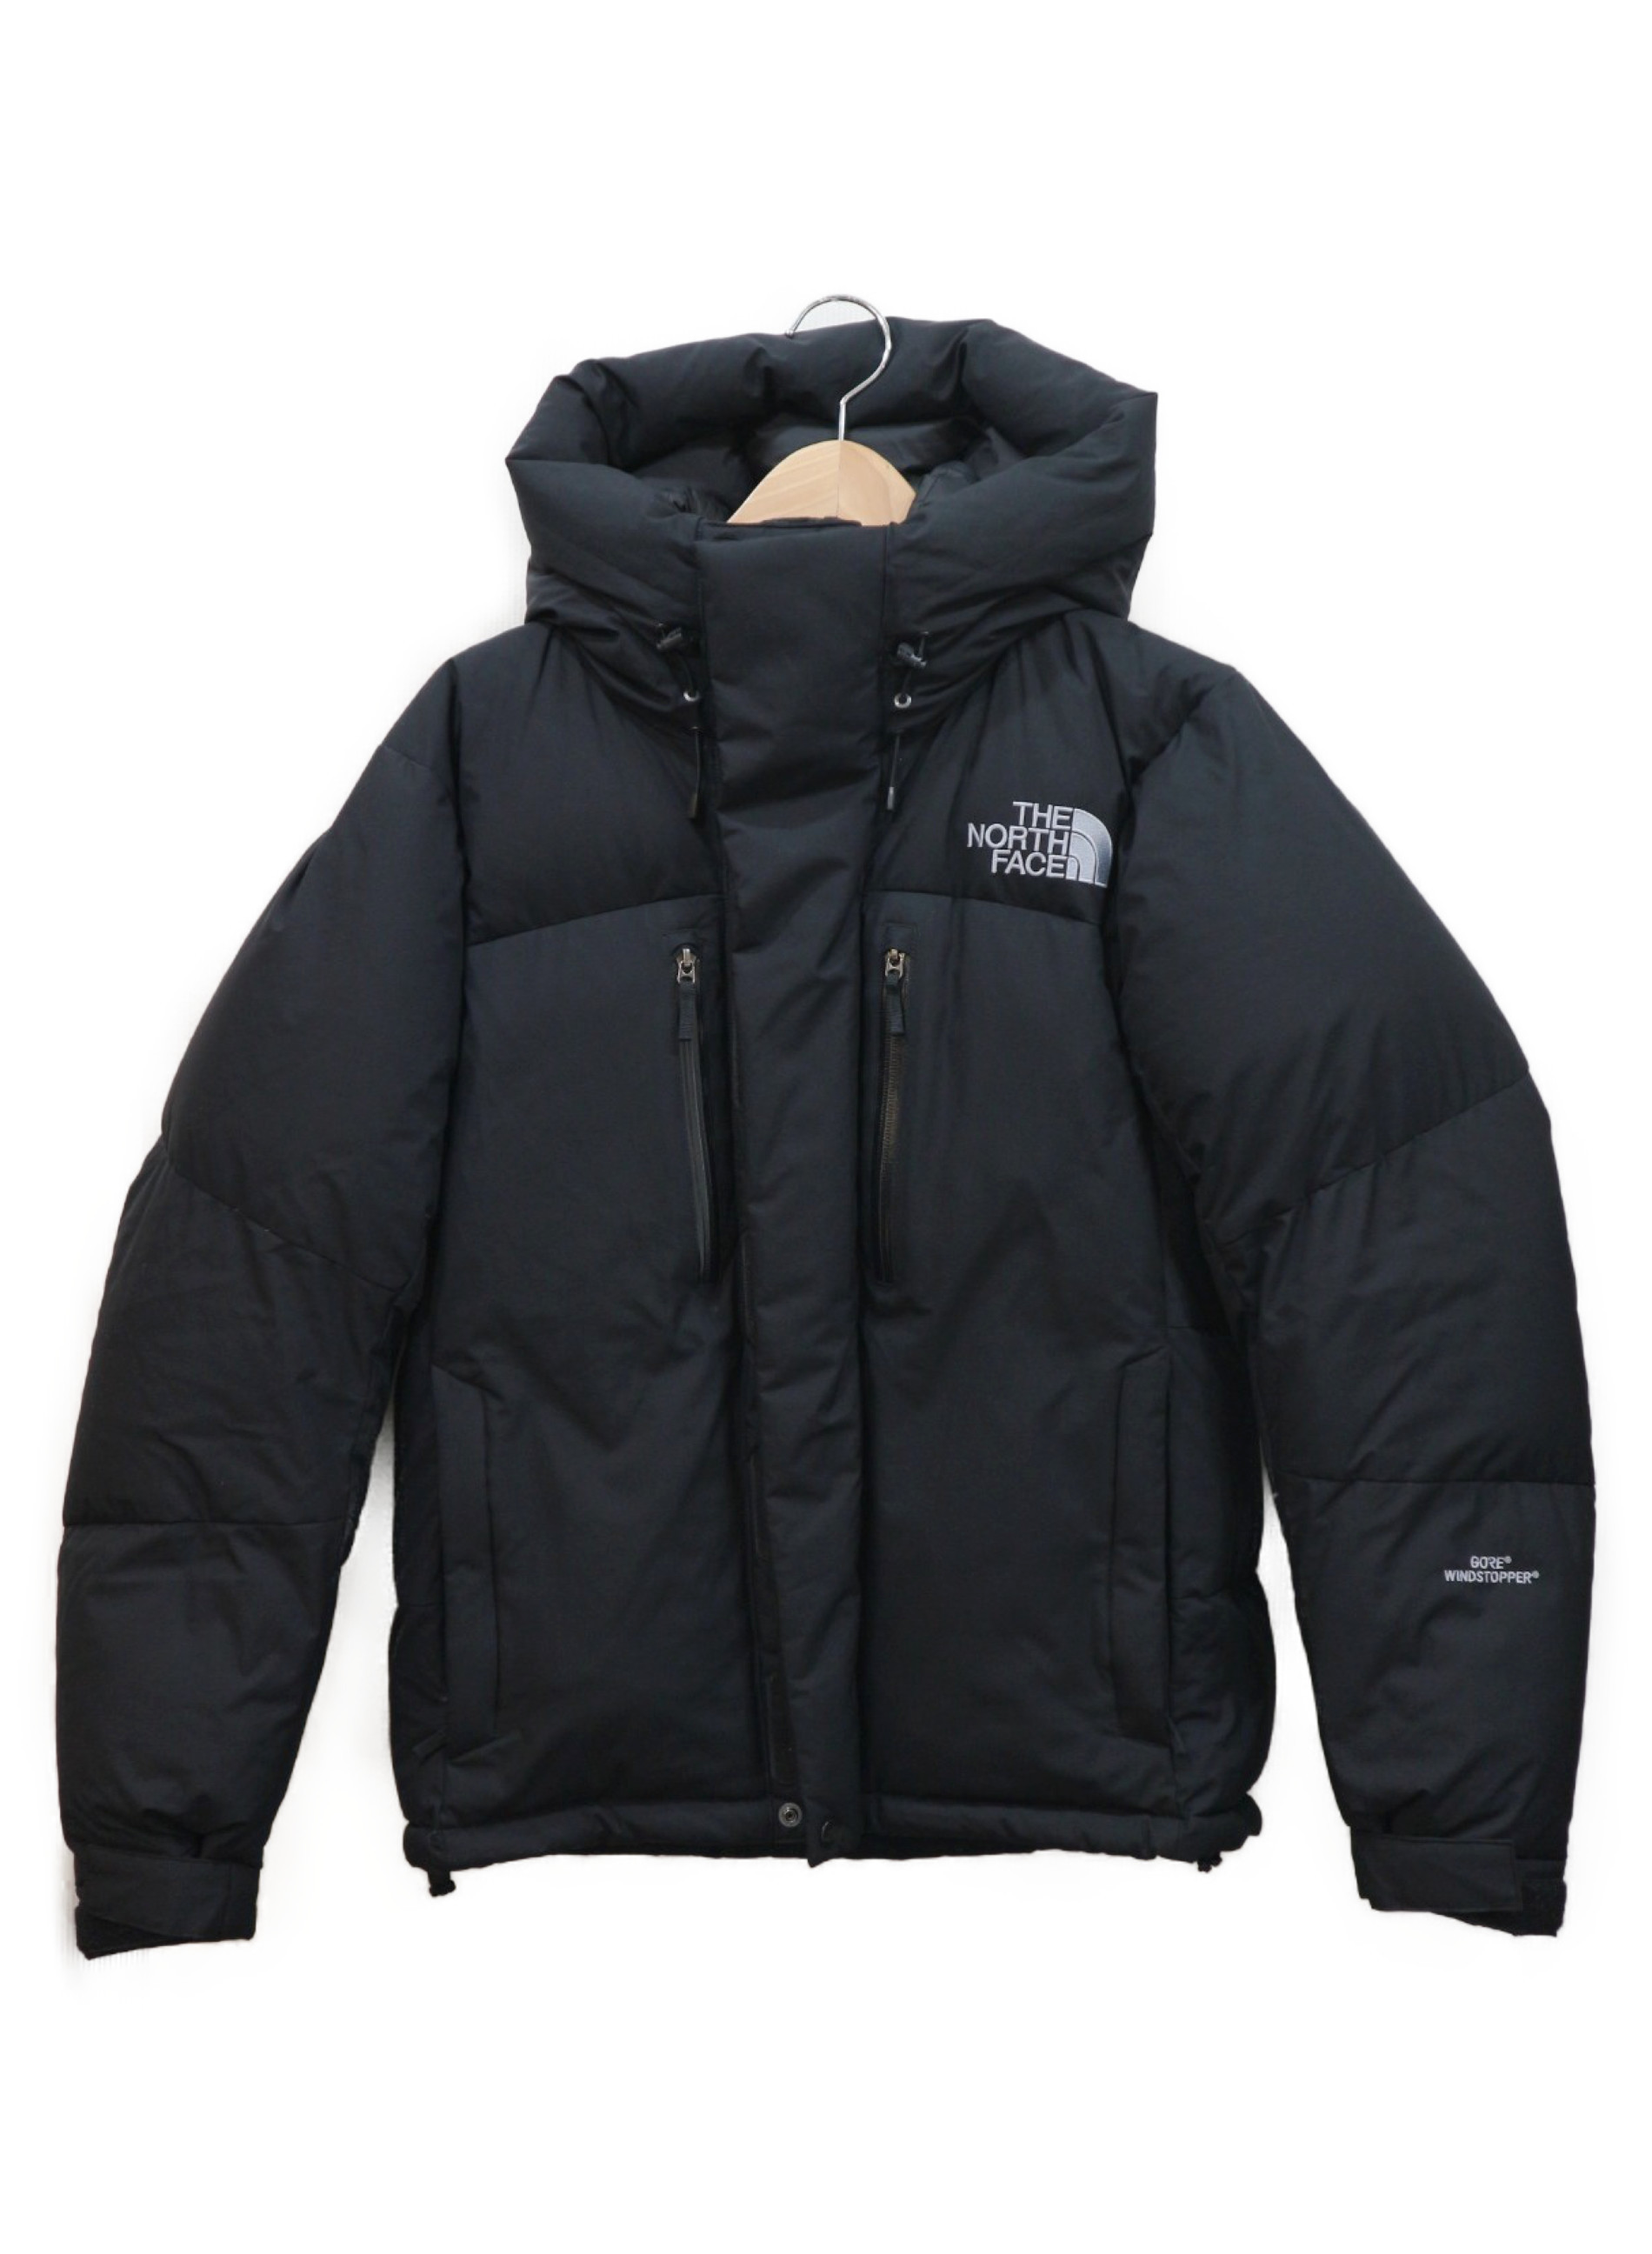 THE NORTH FACE - THE NORTH FACE バルトロライトジャケット ブラック